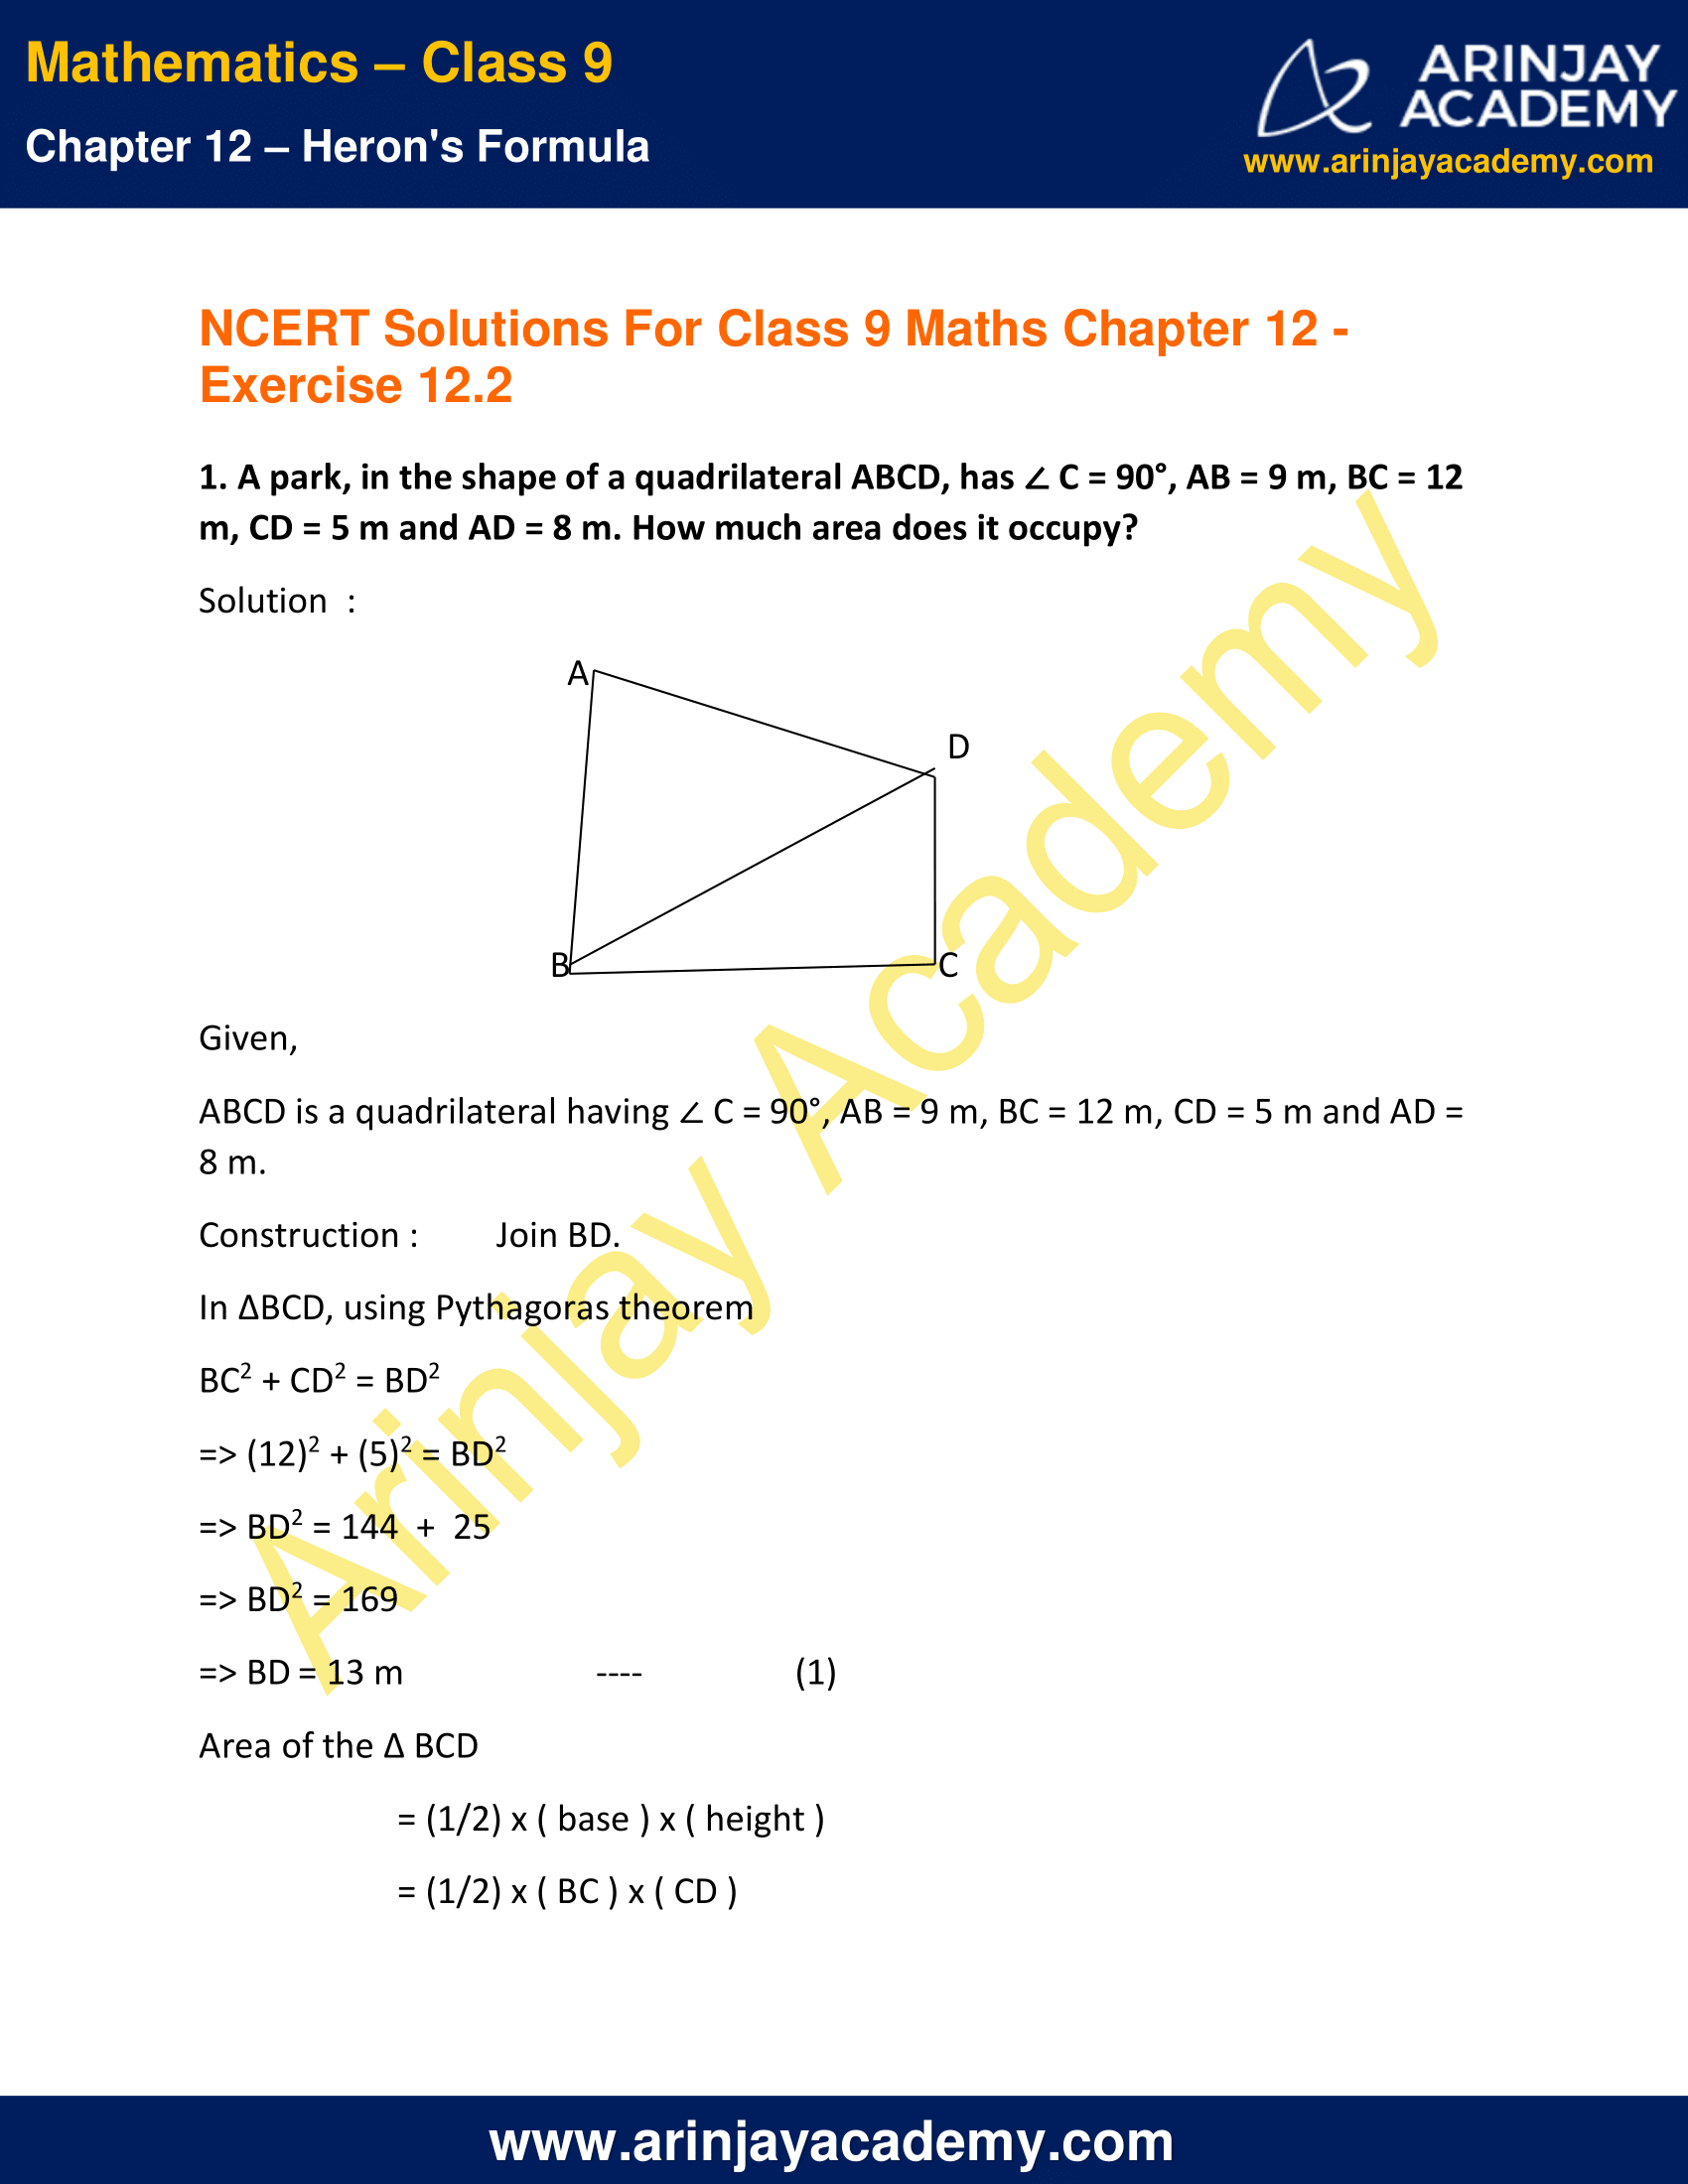 NCERT Solutions For Class 9 Maths Chapter 12 Exercise 12.2 image 1